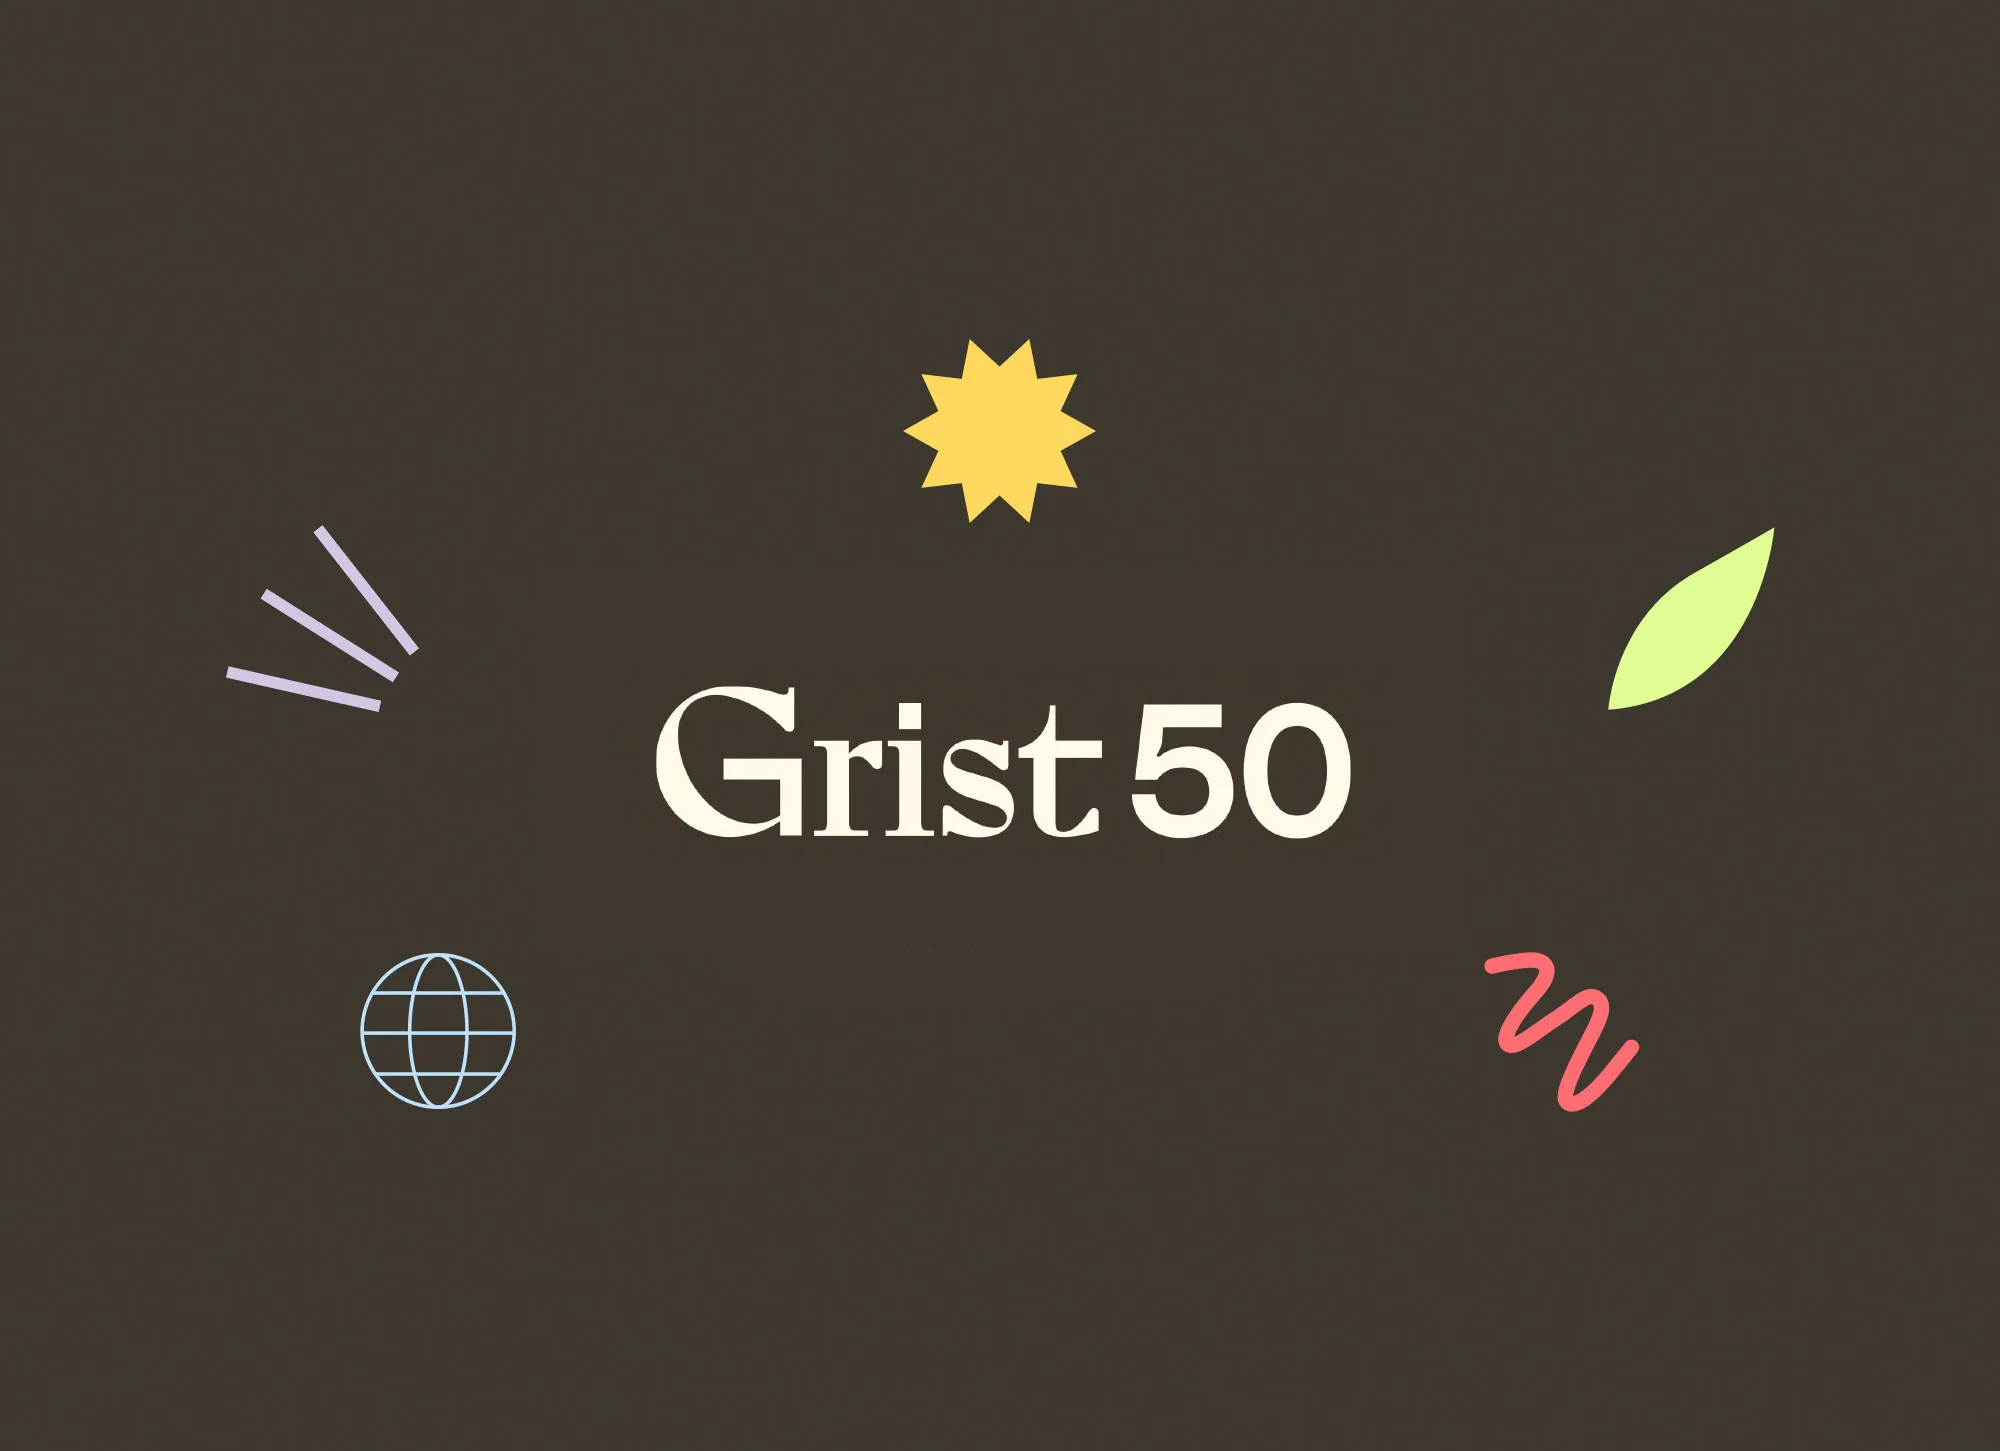 Grist 50 logo surrounded by small, colorful shapes on a dark brown background